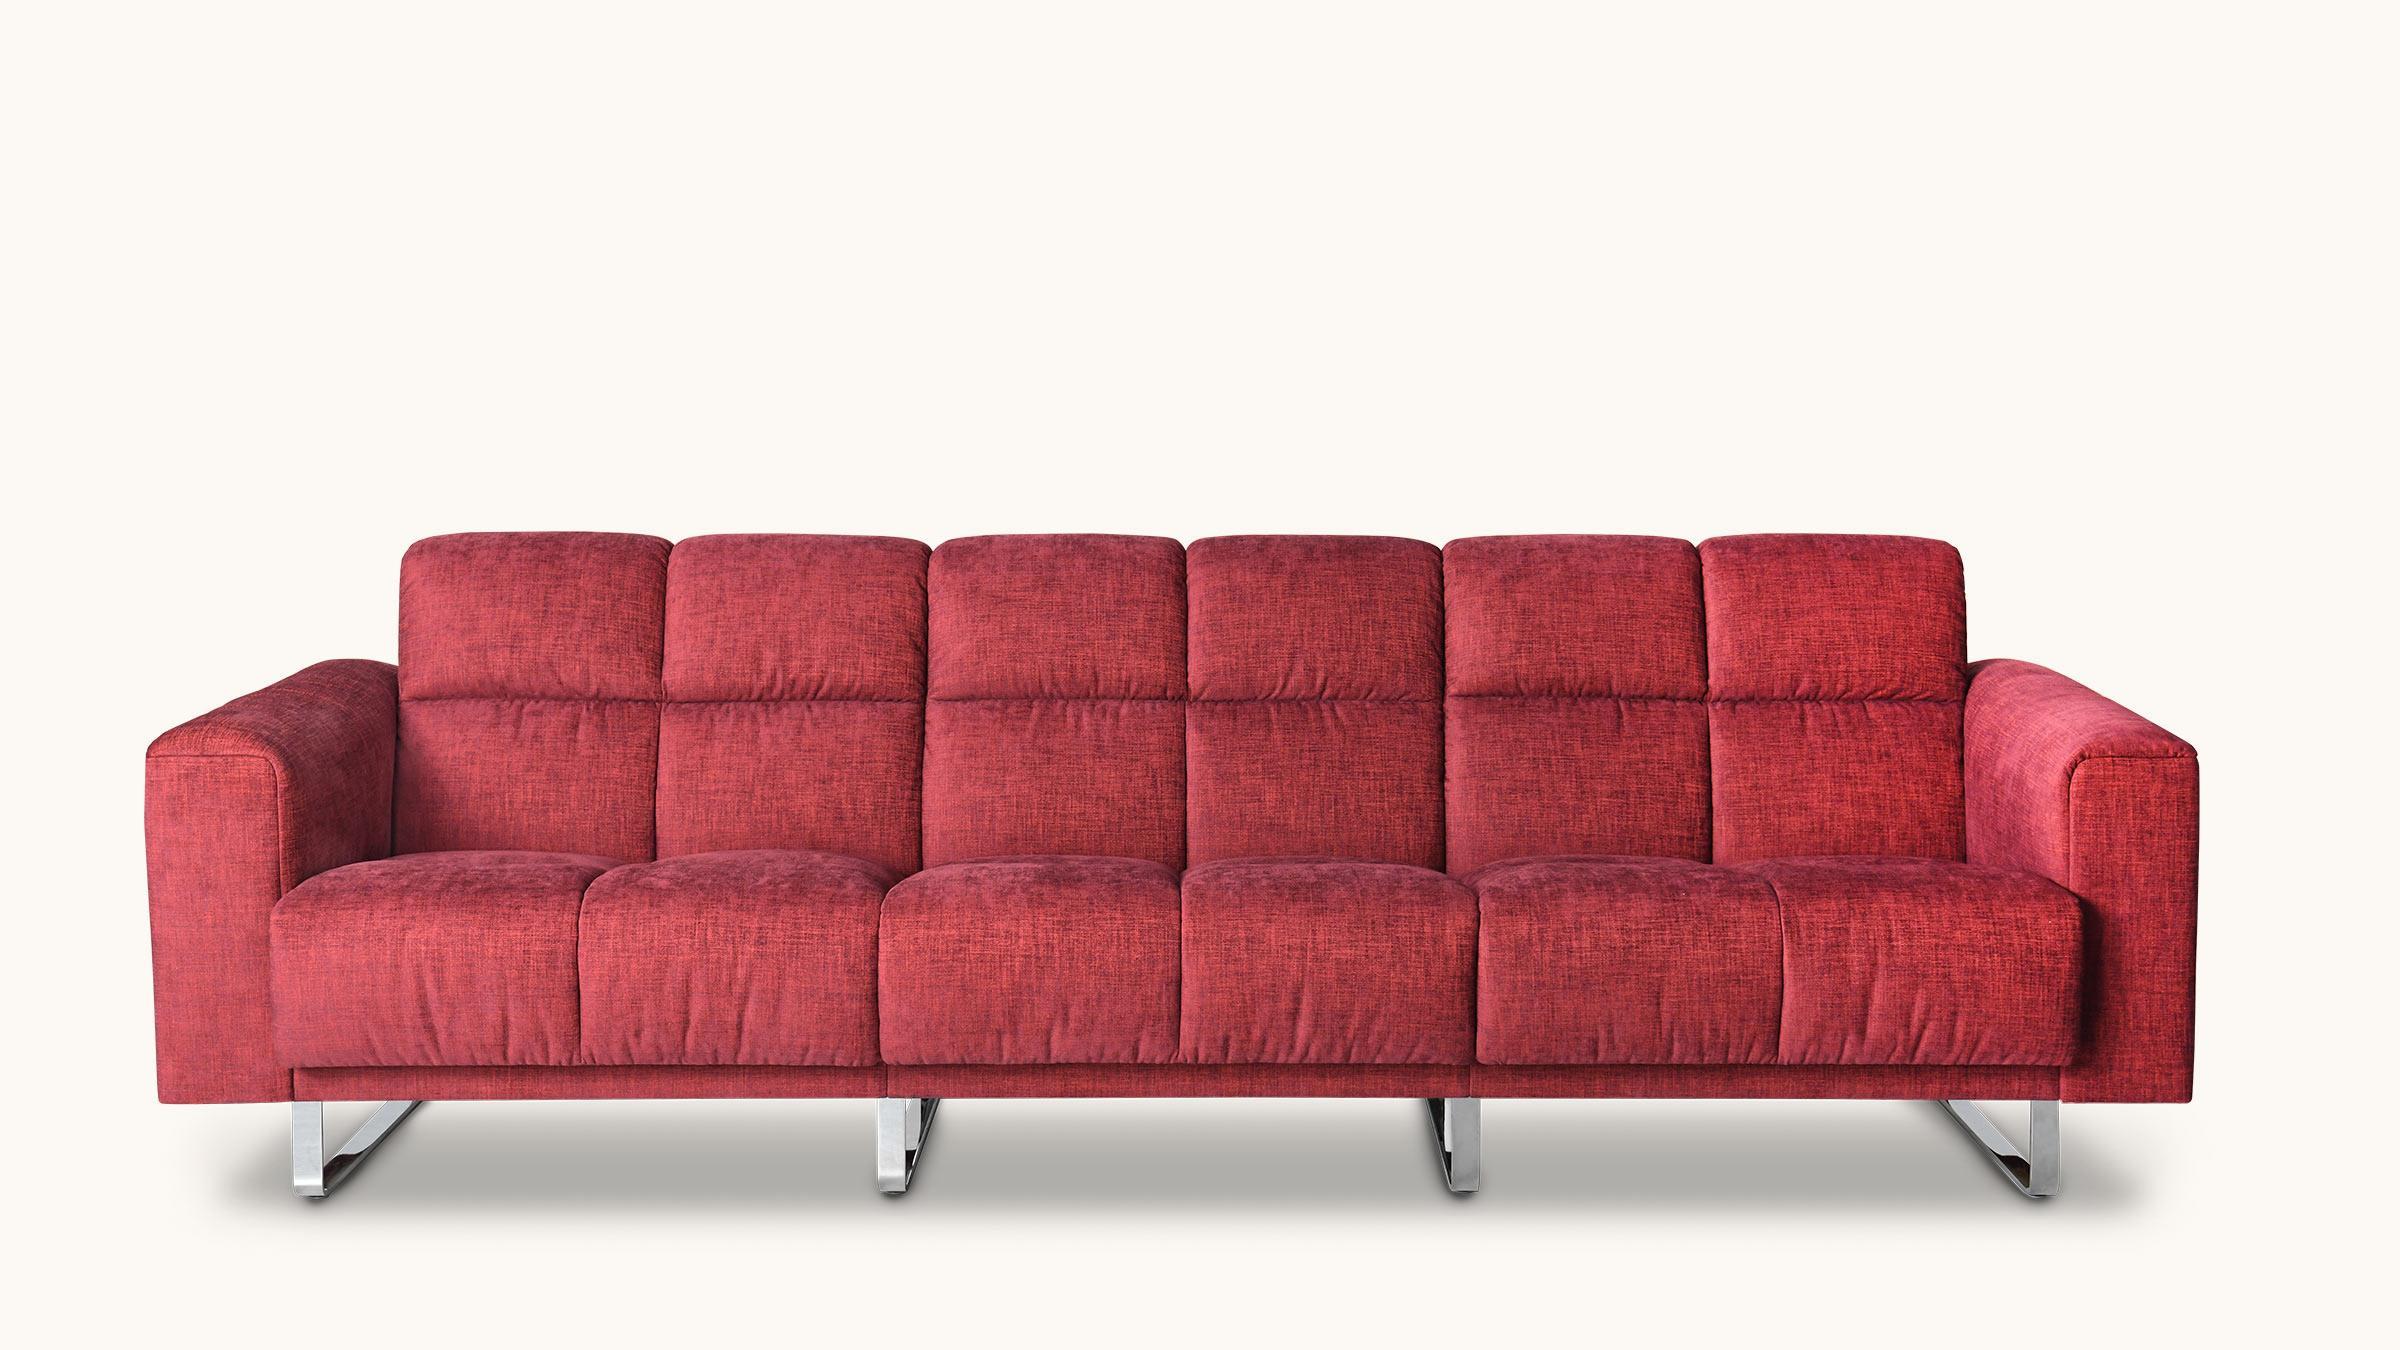 Swiss De Sede DS 580 Three-Seat Sofa in Red Upholstery by De Sede Design-Team For Sale